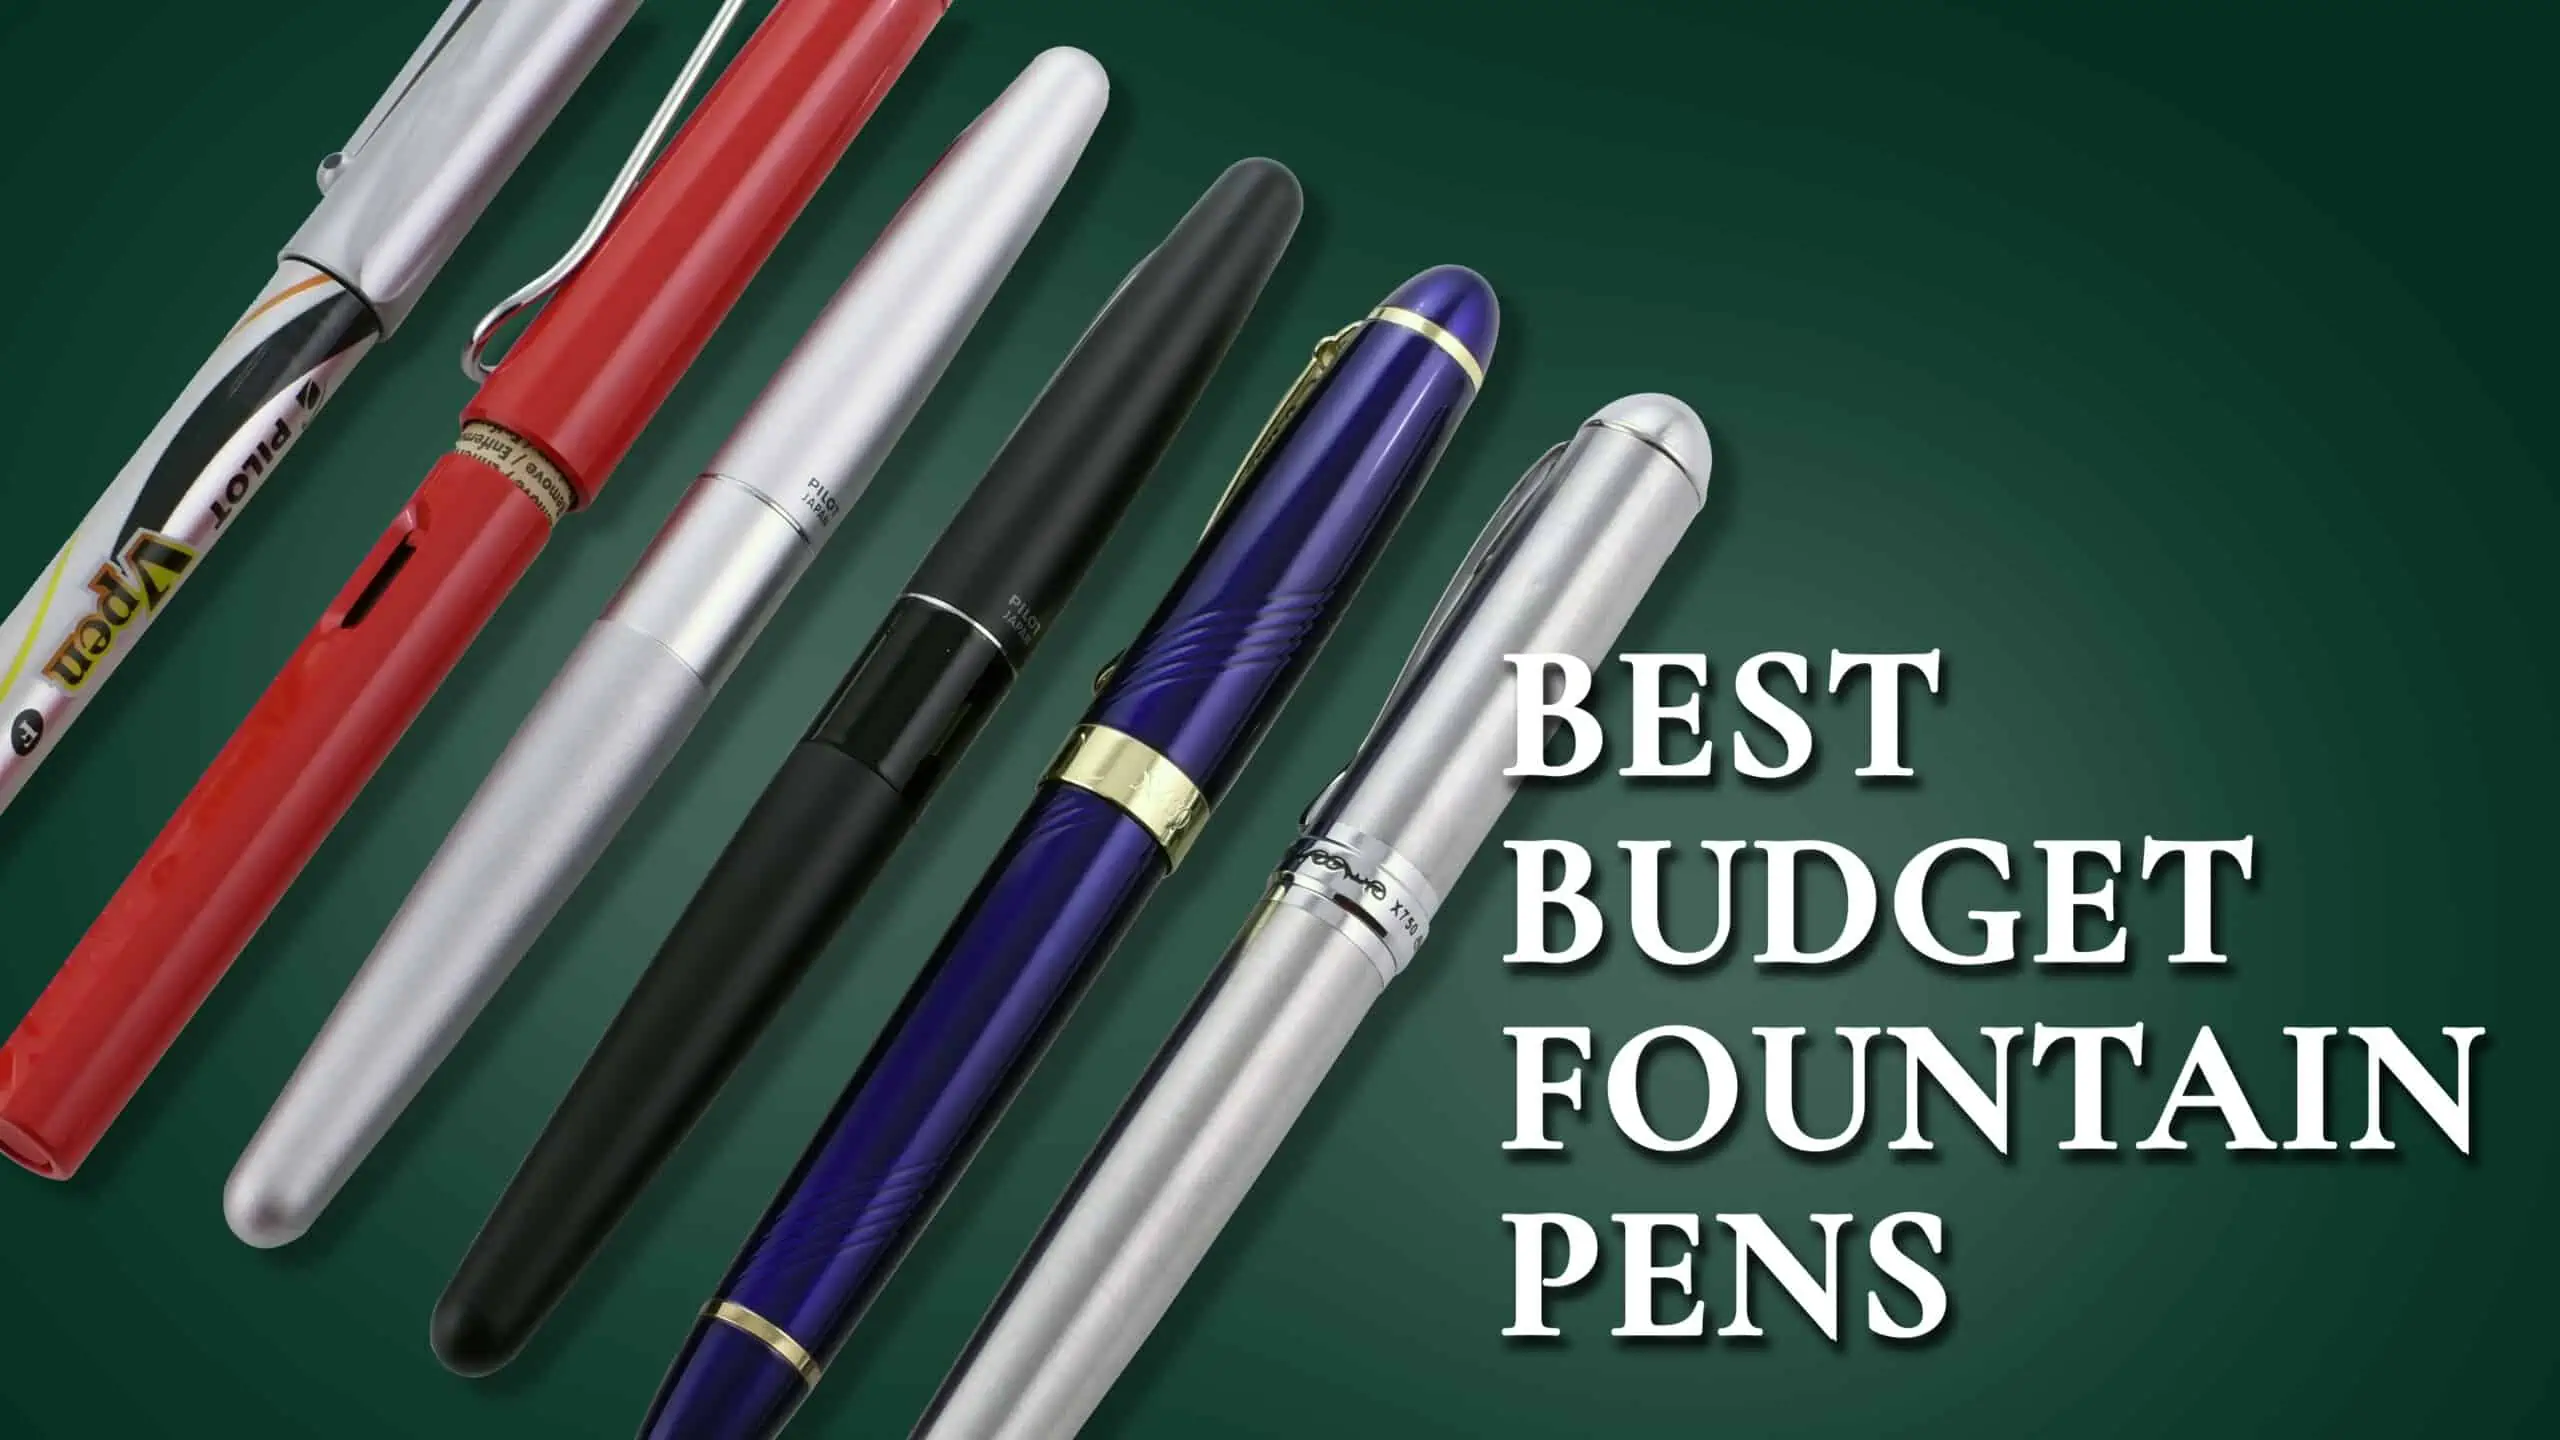 Thursday Drops: Kaweco Sport Fountain Pens, Kaweco Sketch-Up Clutch  Pencils, and More! — The Gentleman Stationer